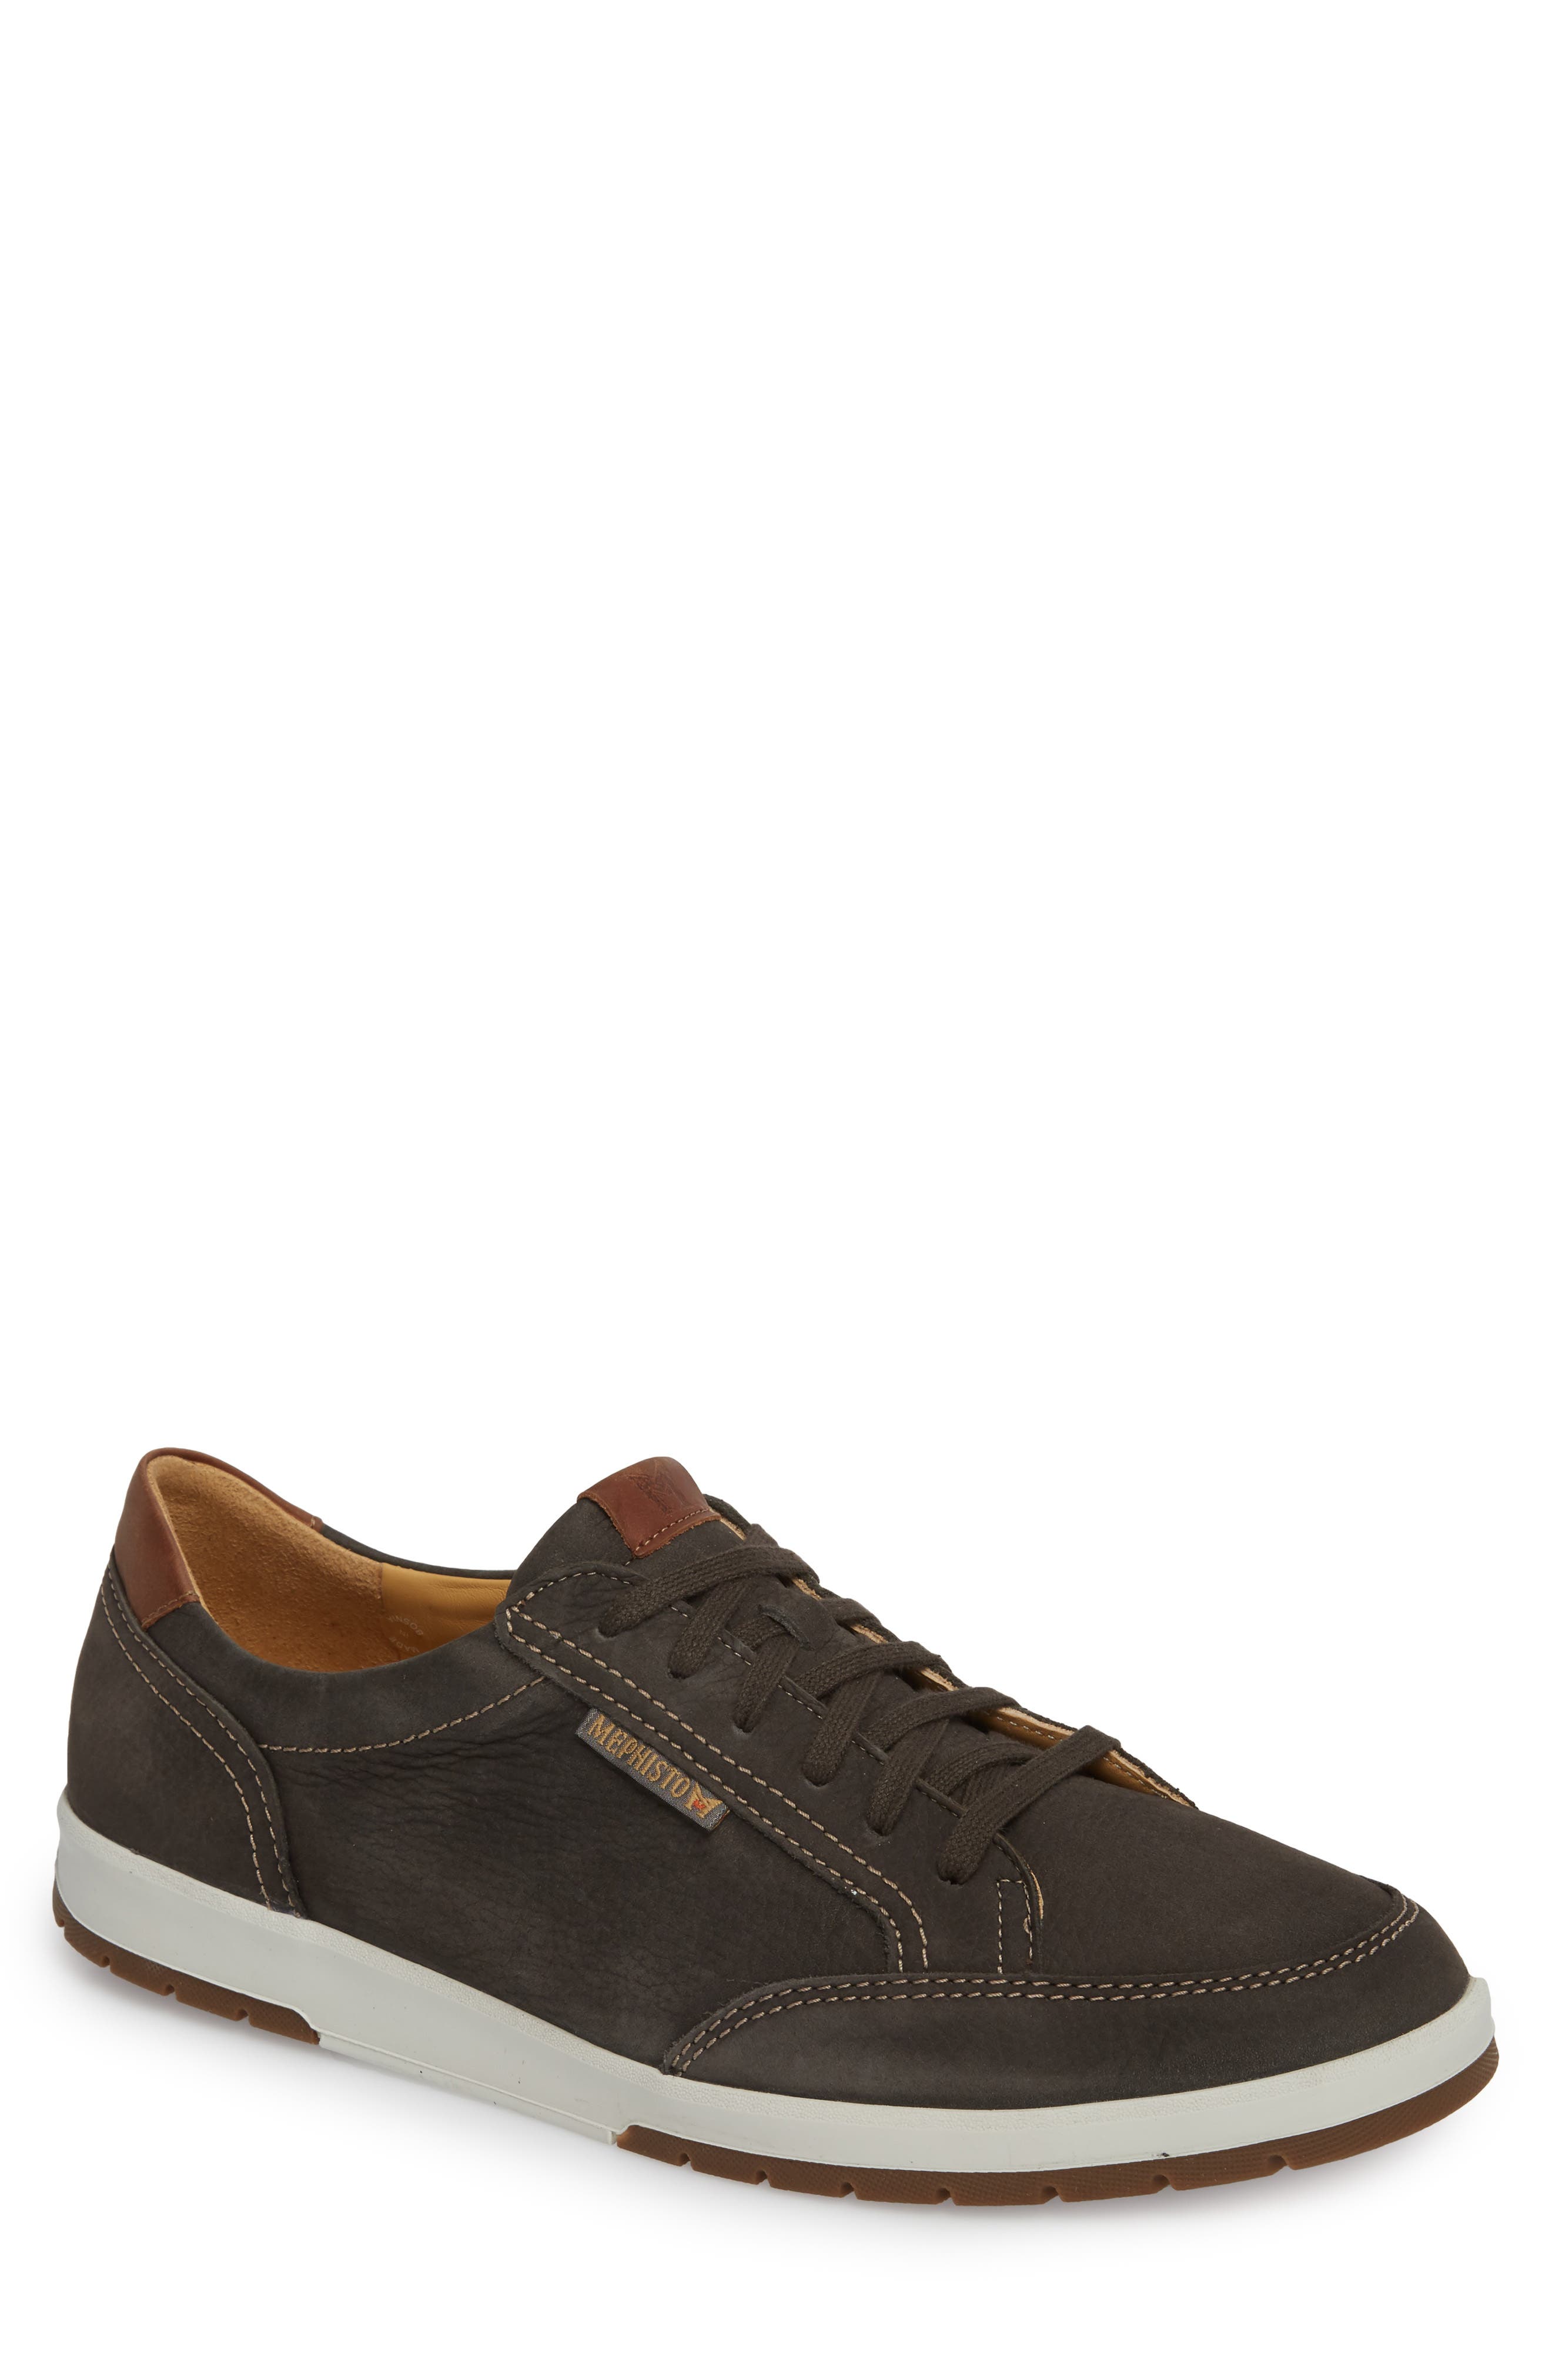 mephisto men's shoes clearance